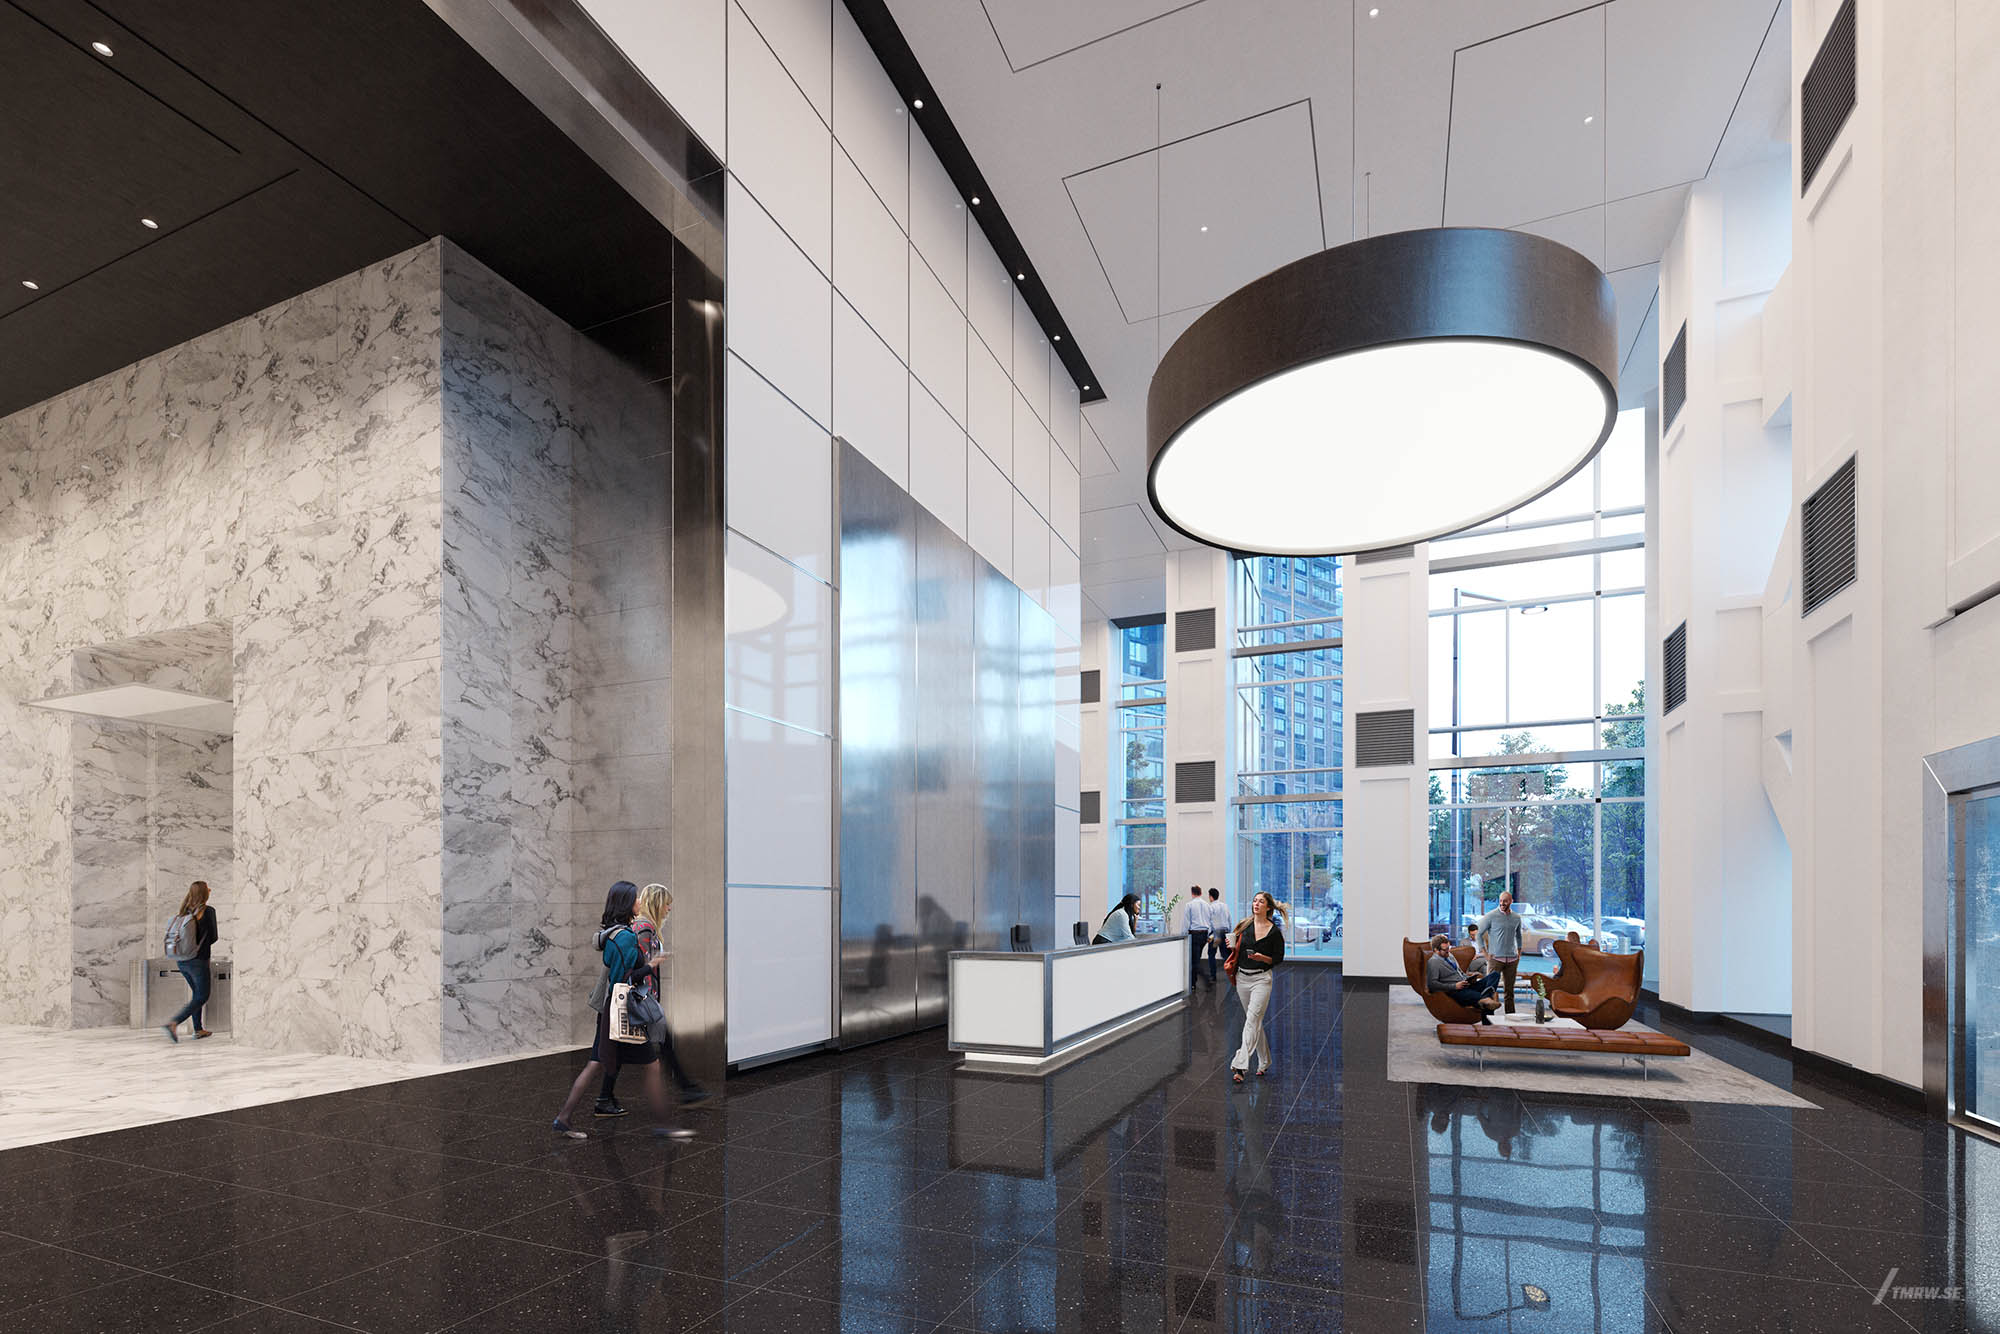 Architectural visualization of One Court Square for Gensler, an office lobby view in day light from an interior view.